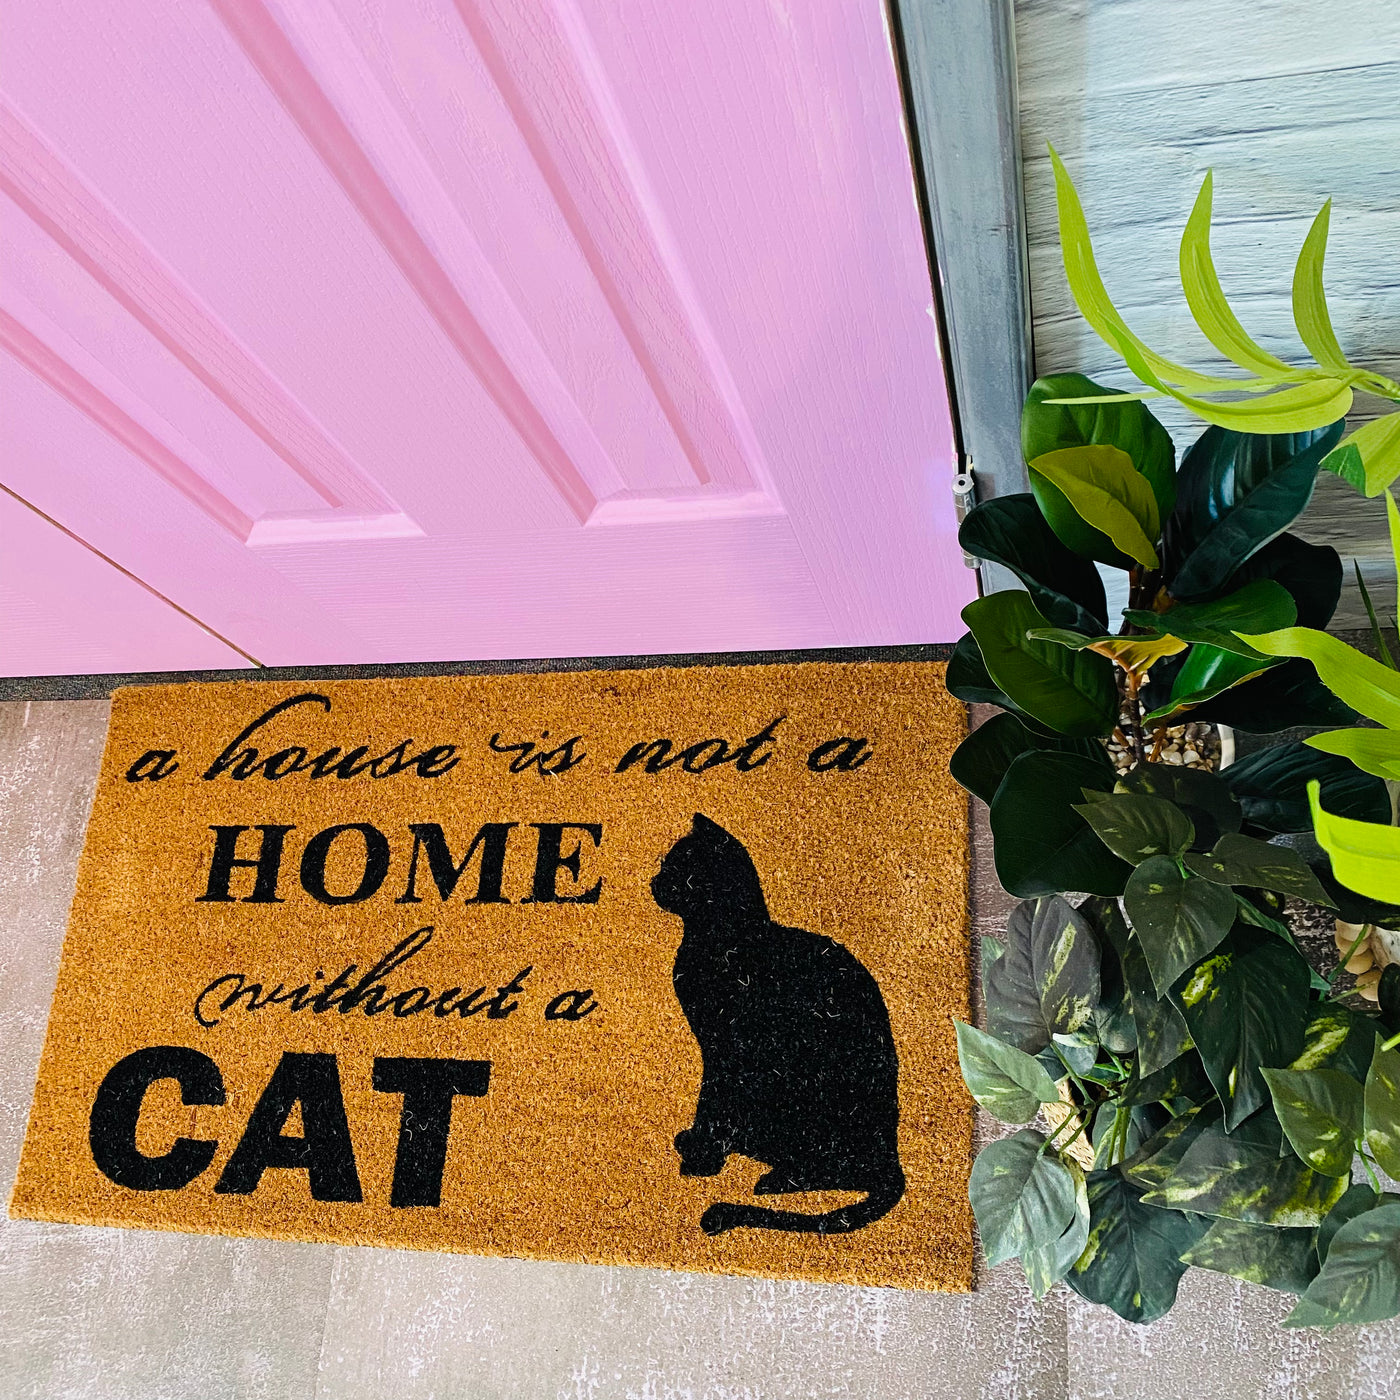 A House Is Not A Home - CAT